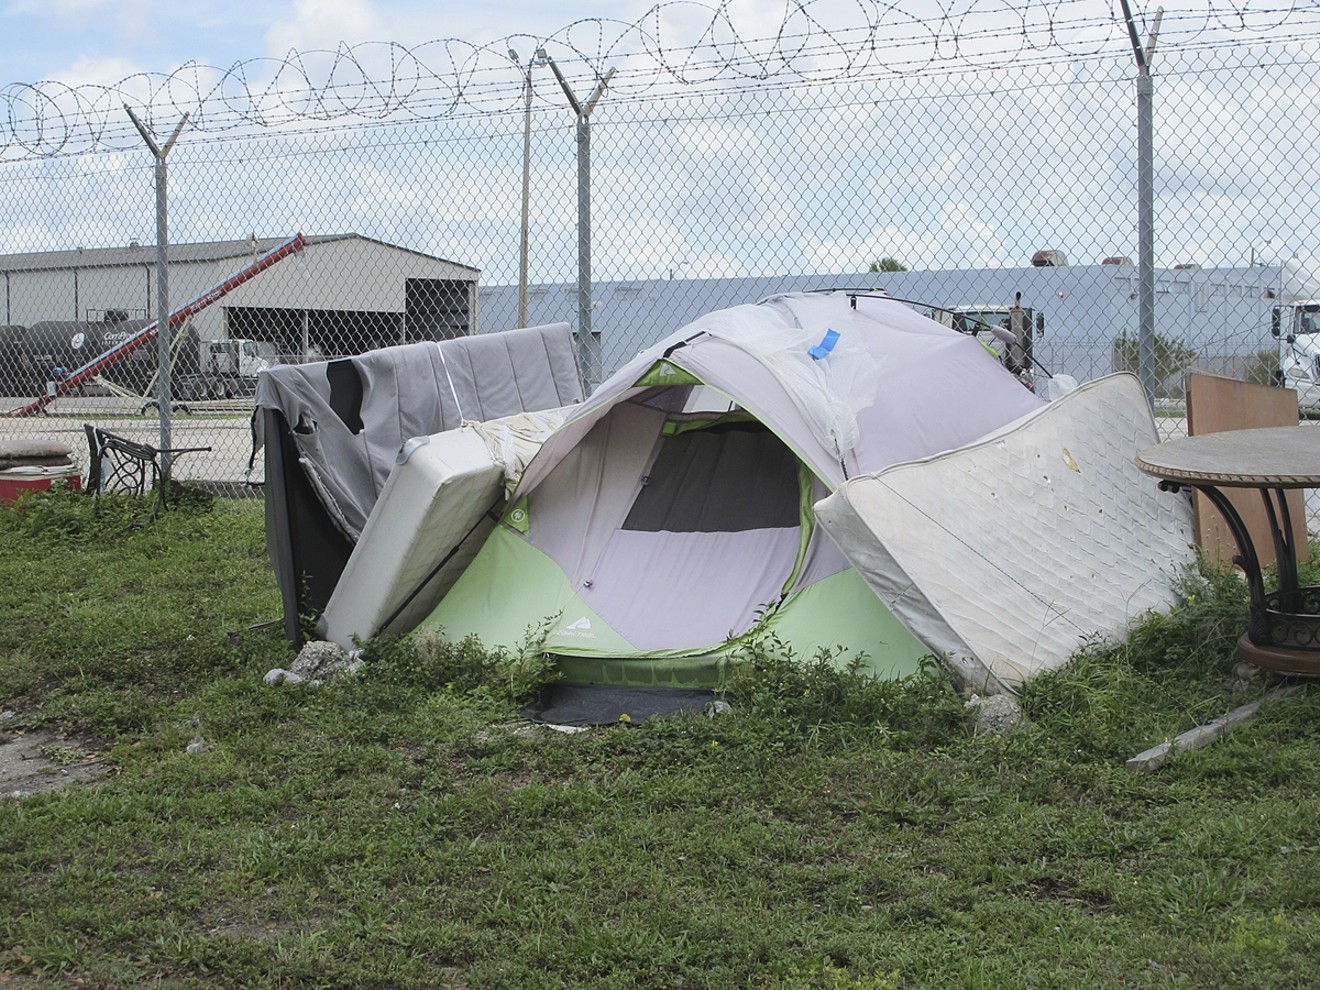 See more photos of life in the sex offender tent city near Hialeah. 